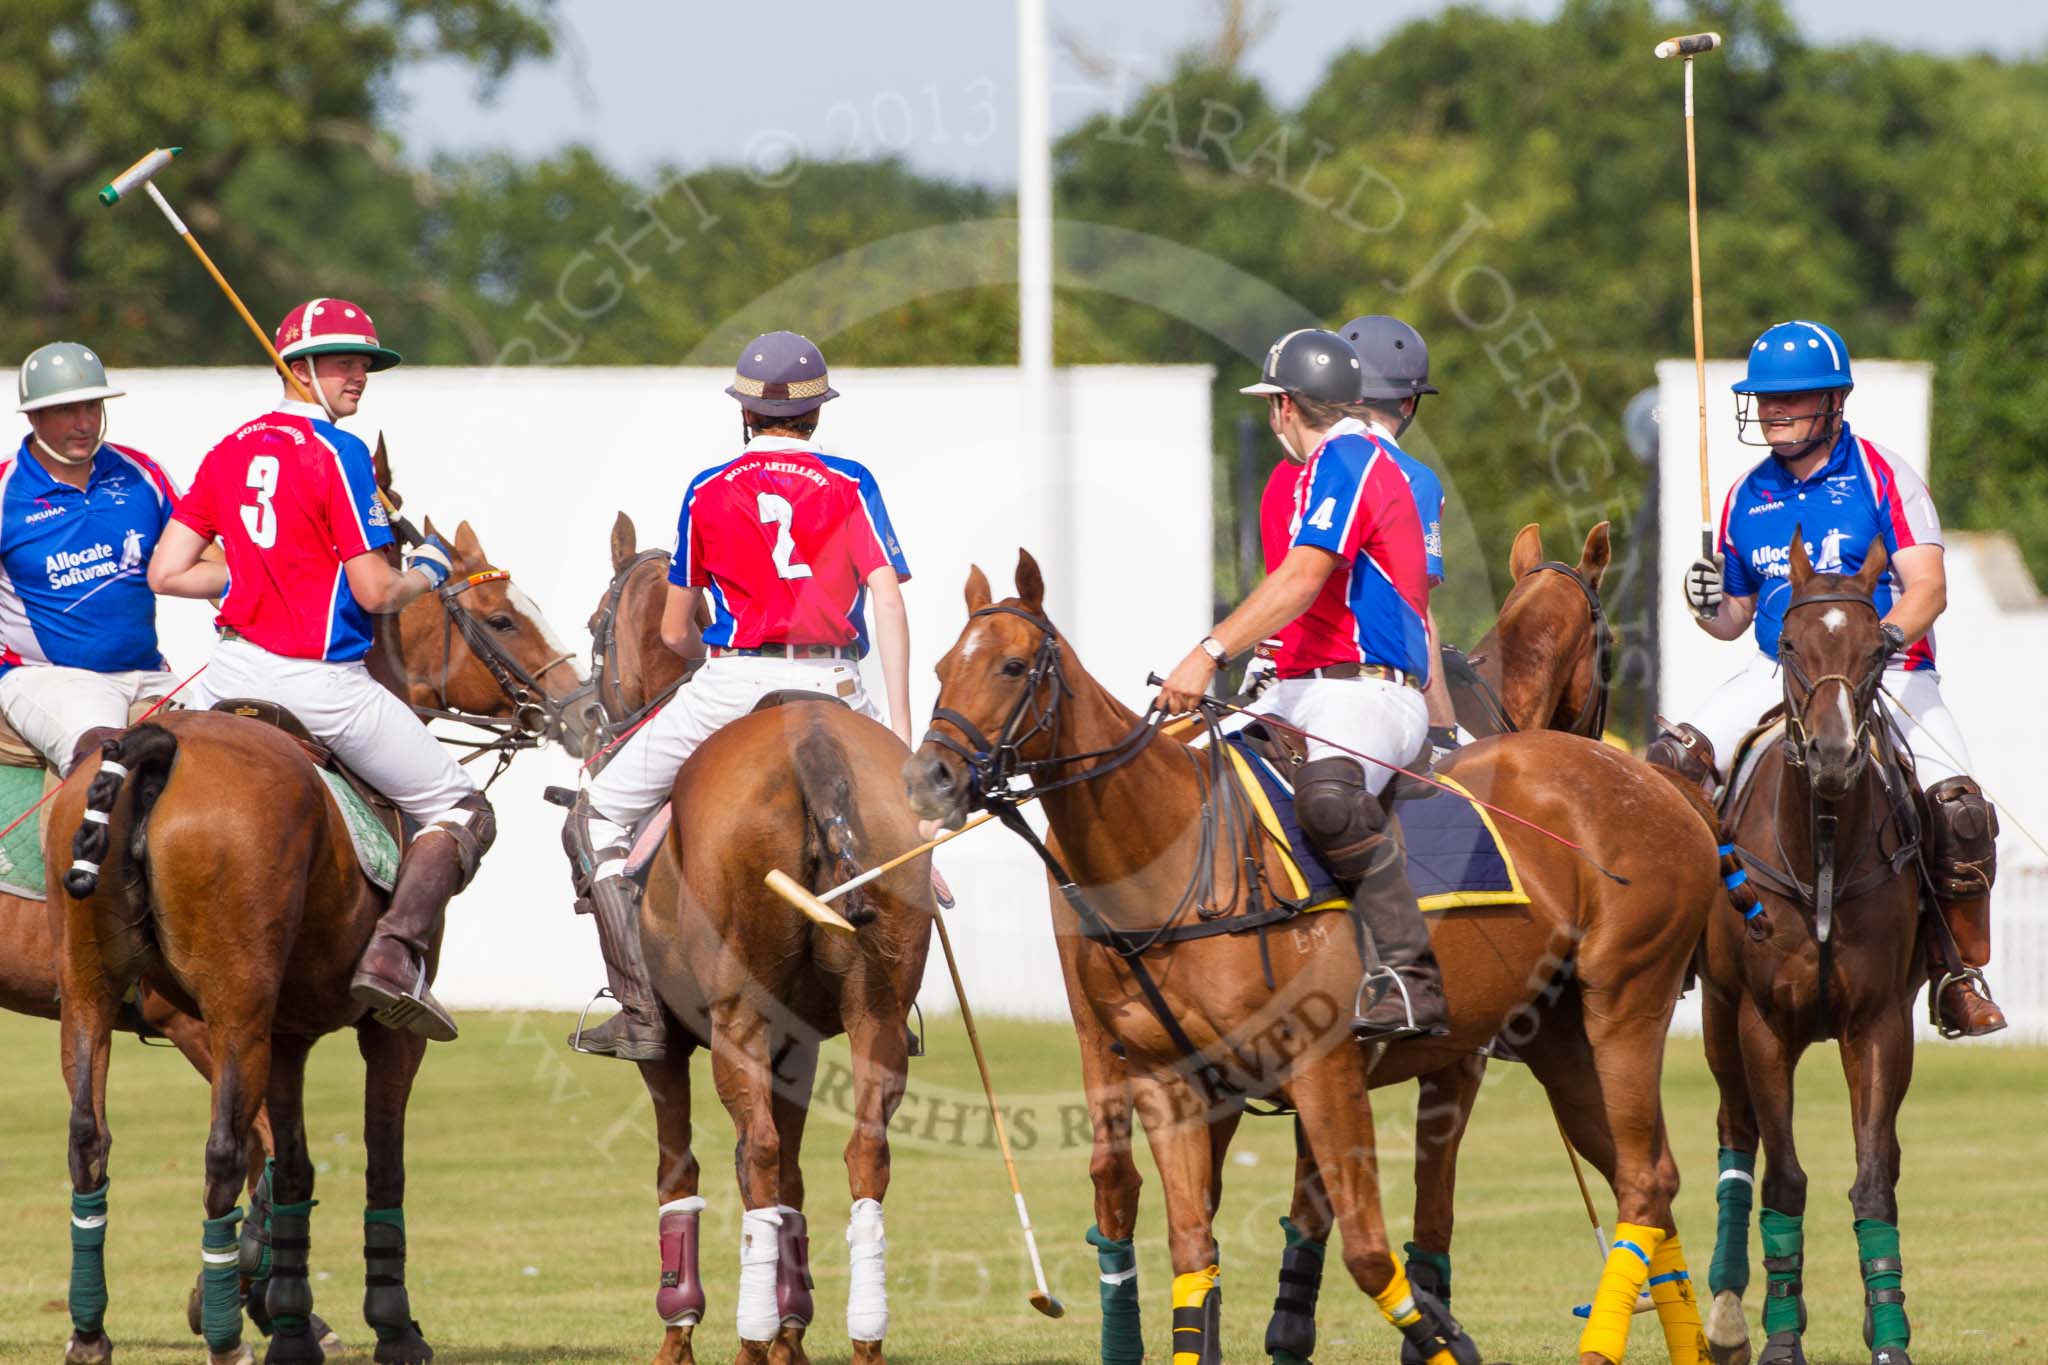 DBPC Polo in the Park 2013.
Dallas Burston Polo Club, ,
Southam,
Warwickshire,
United Kingdom,
on 01 September 2013 at 14:15, image #388